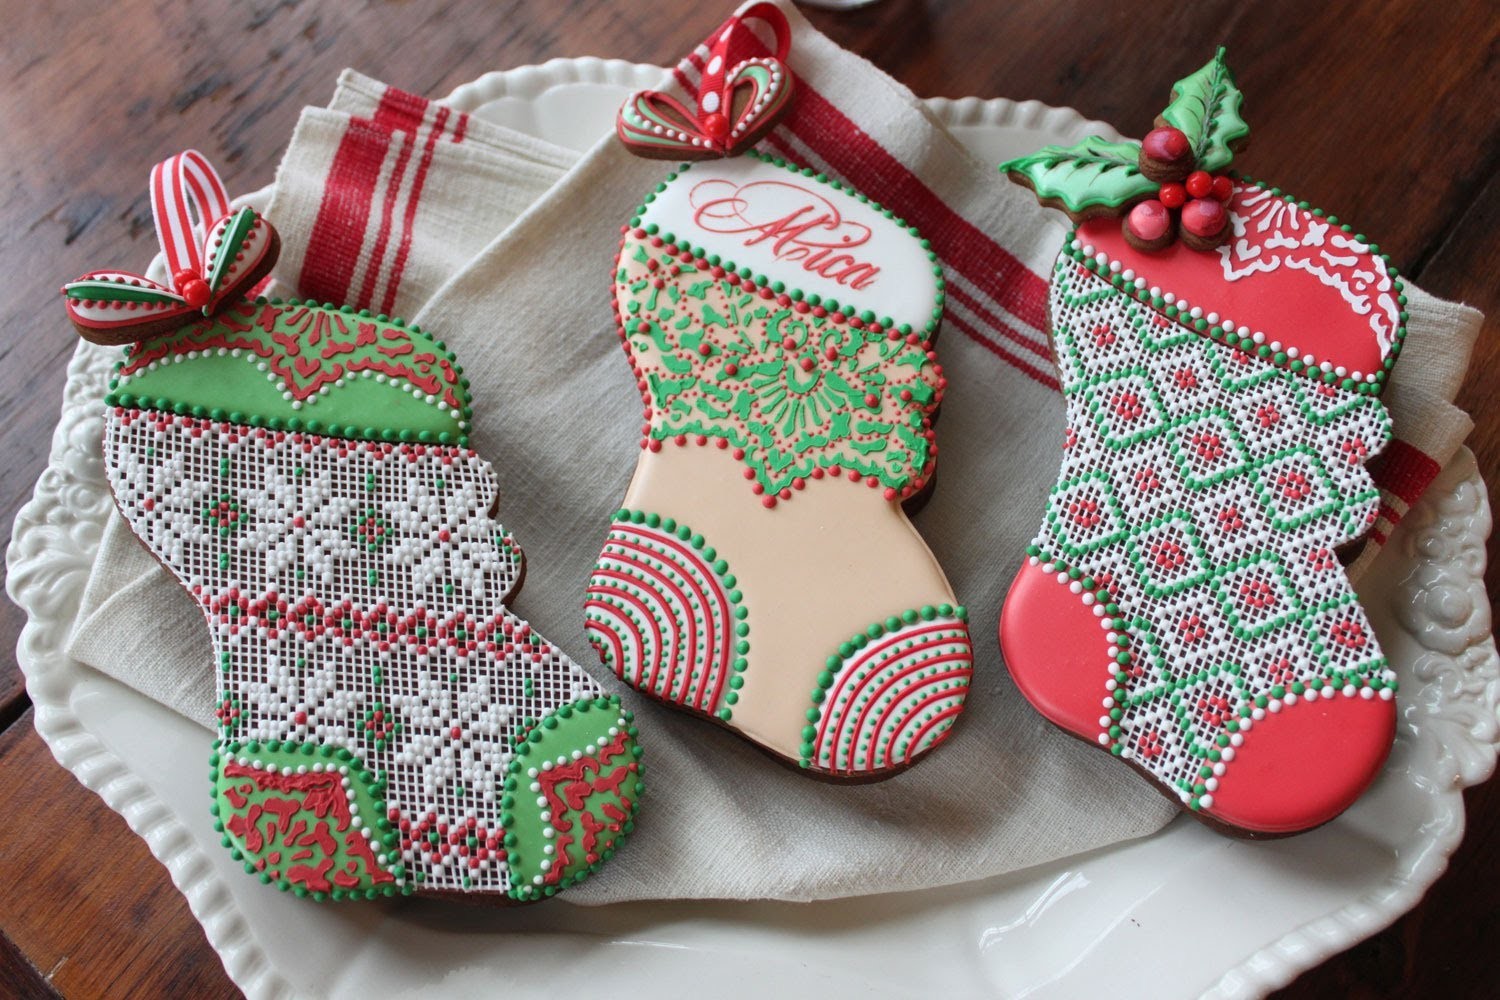 How to Assemble 3-D Stuff-able Christmas Stocking Cookies